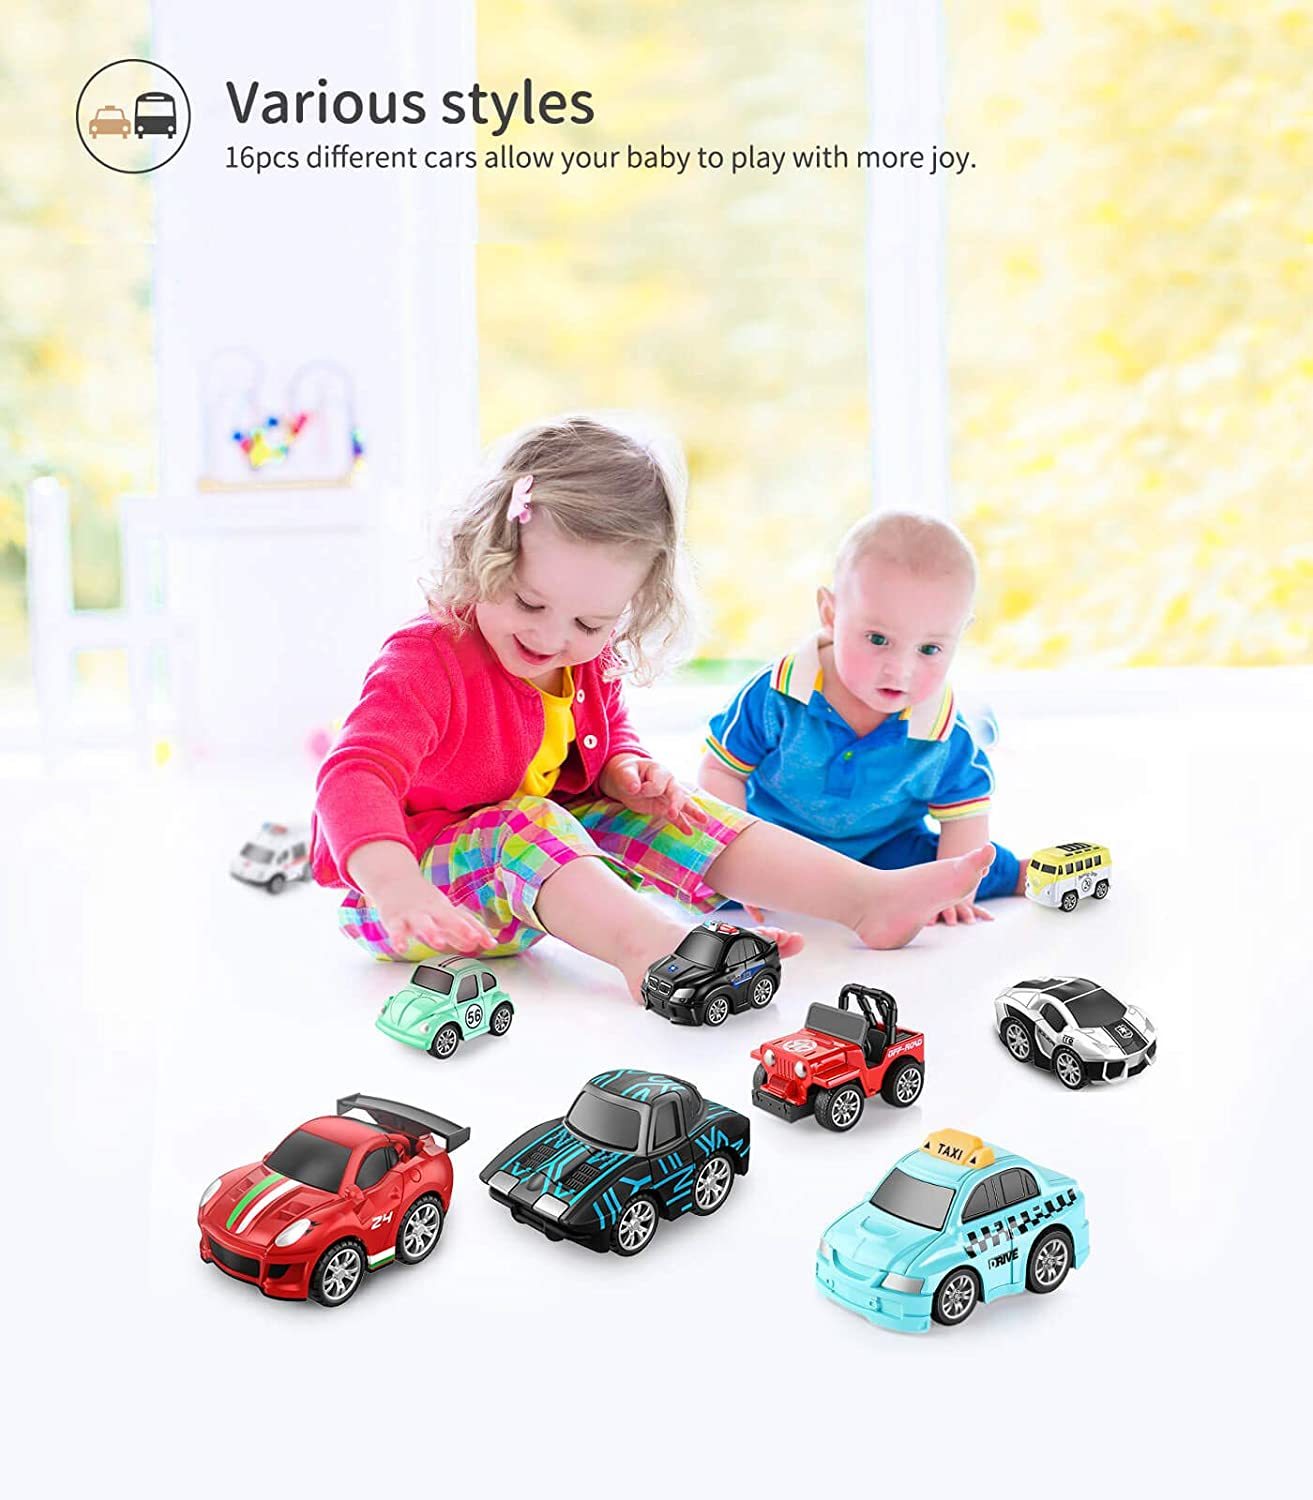 Metal Car Toys Set Die Cast Racing Model Collection Vehicle Play Set for 3 4 5 Year Old Boys Girls Kids 16pcs